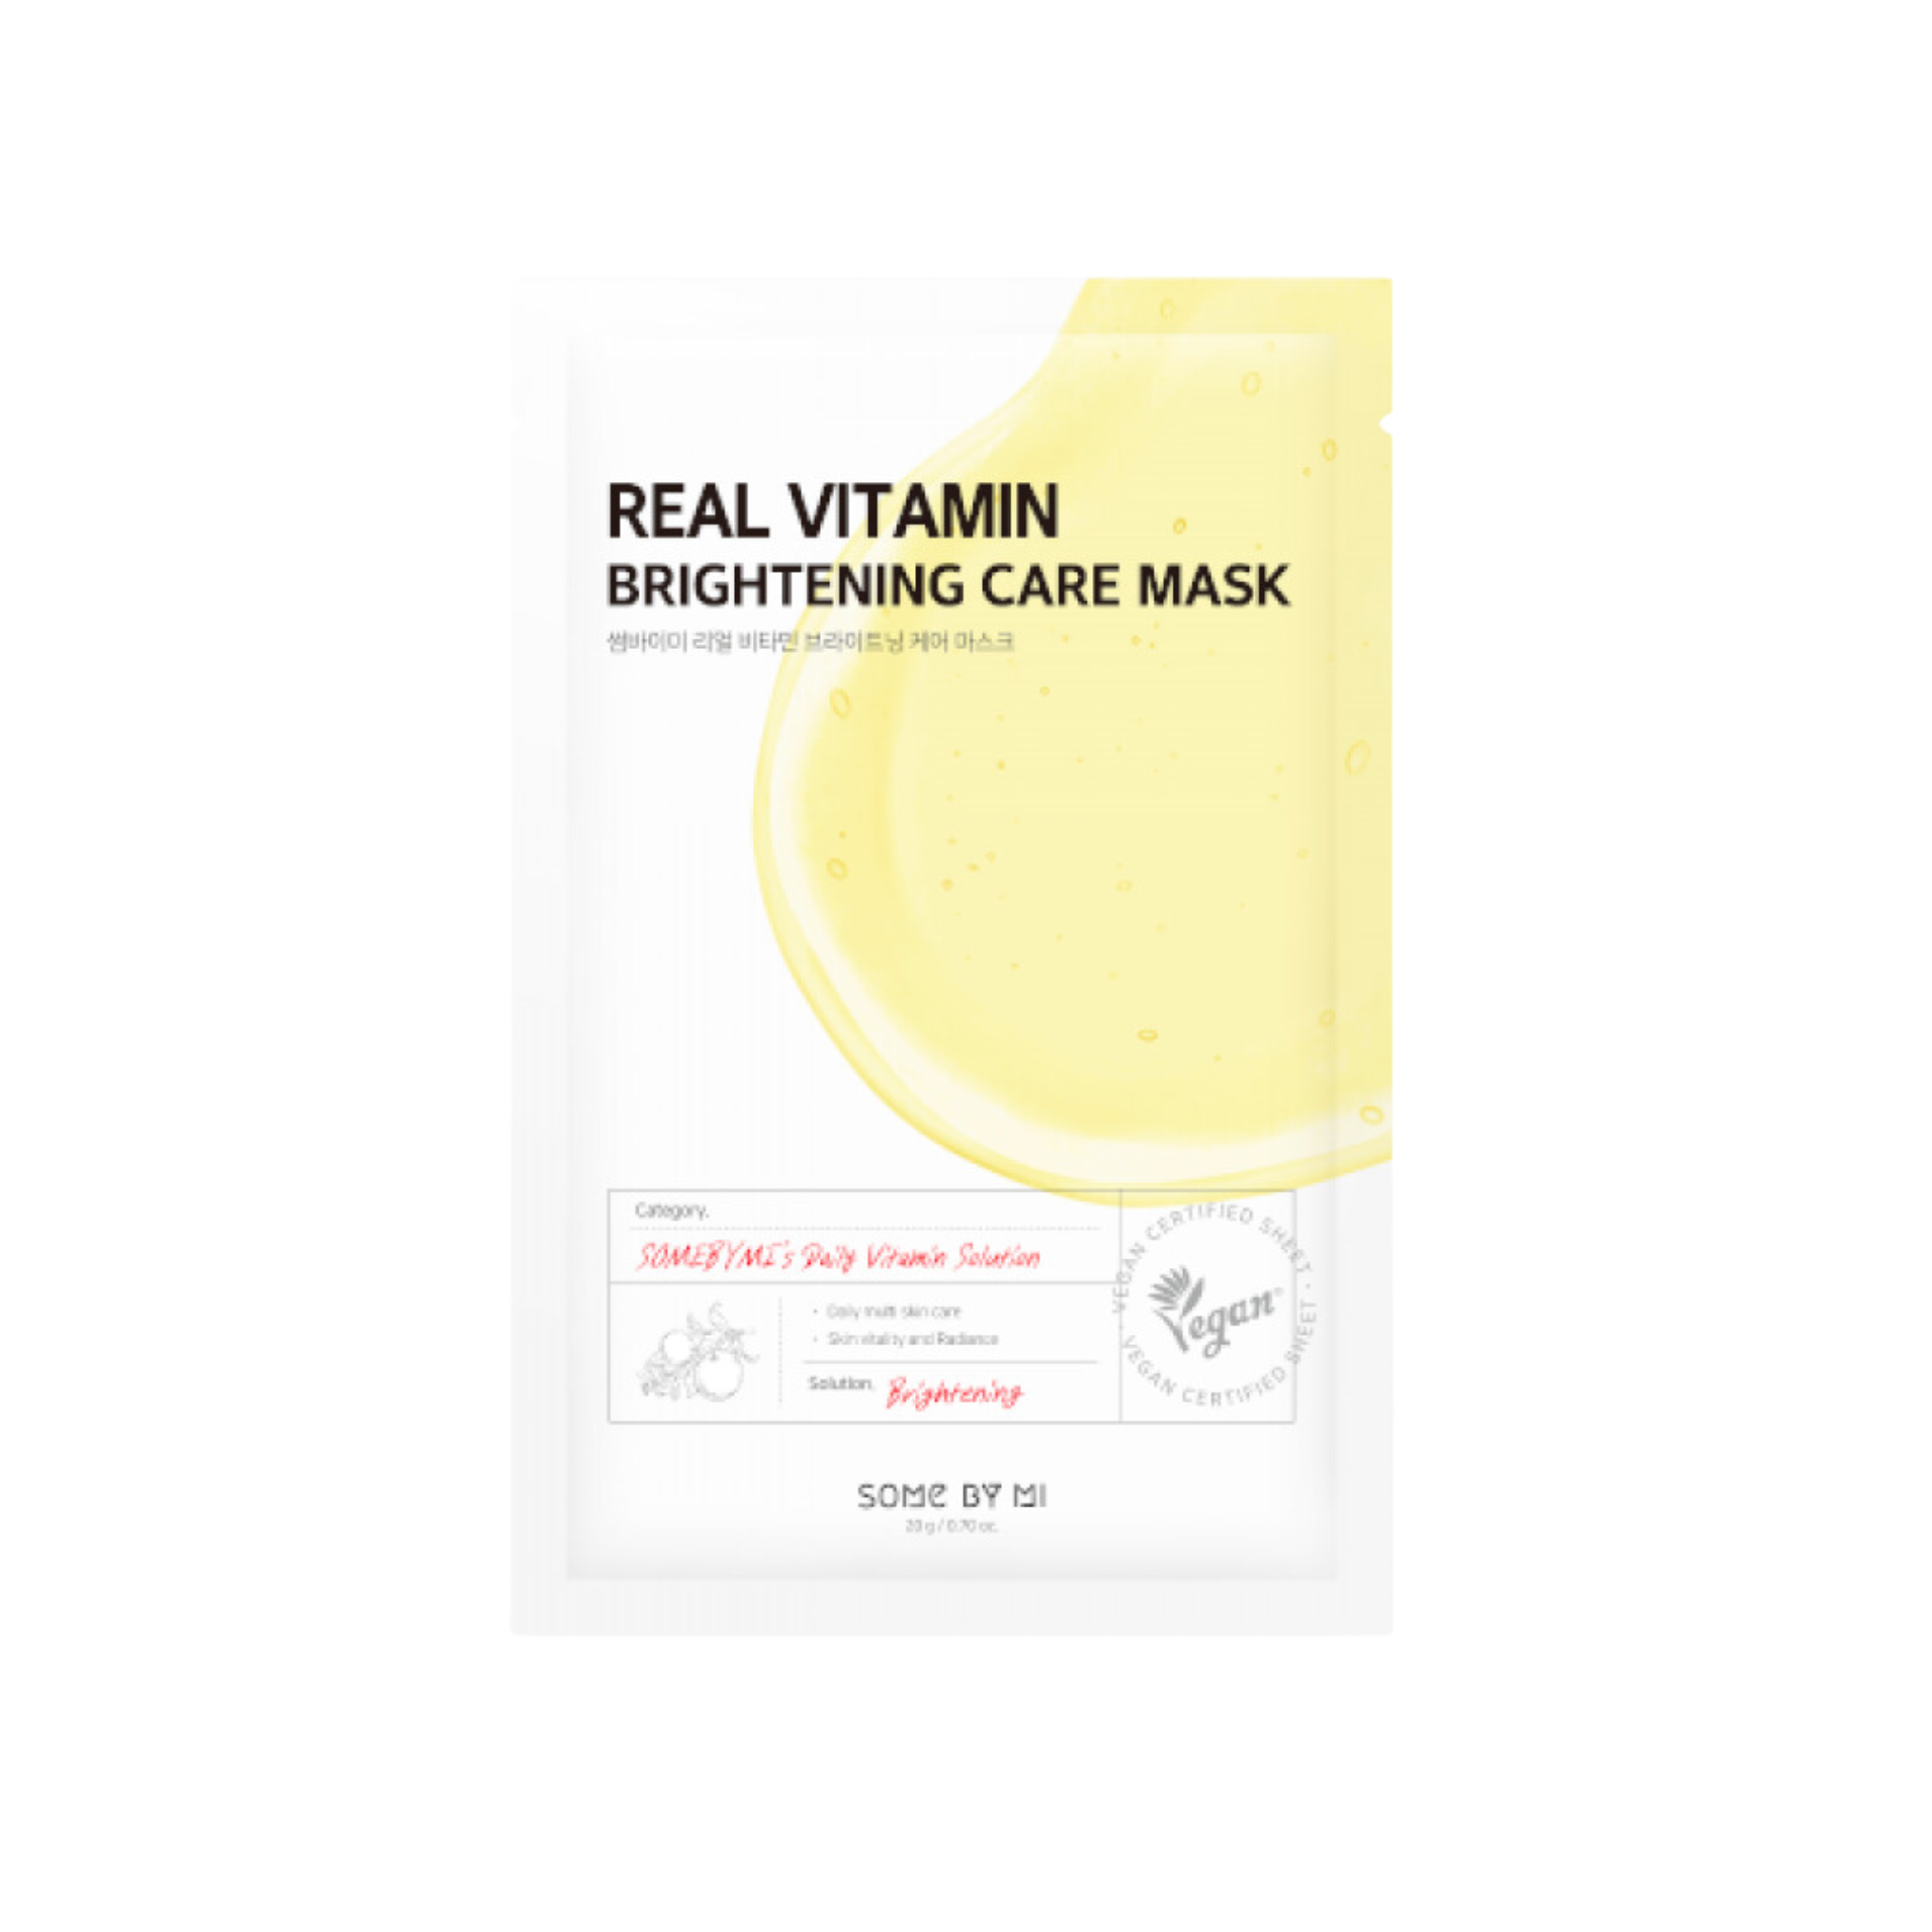 SOME BY MI Real Vitamin Brightening Care Mask (1pcs)